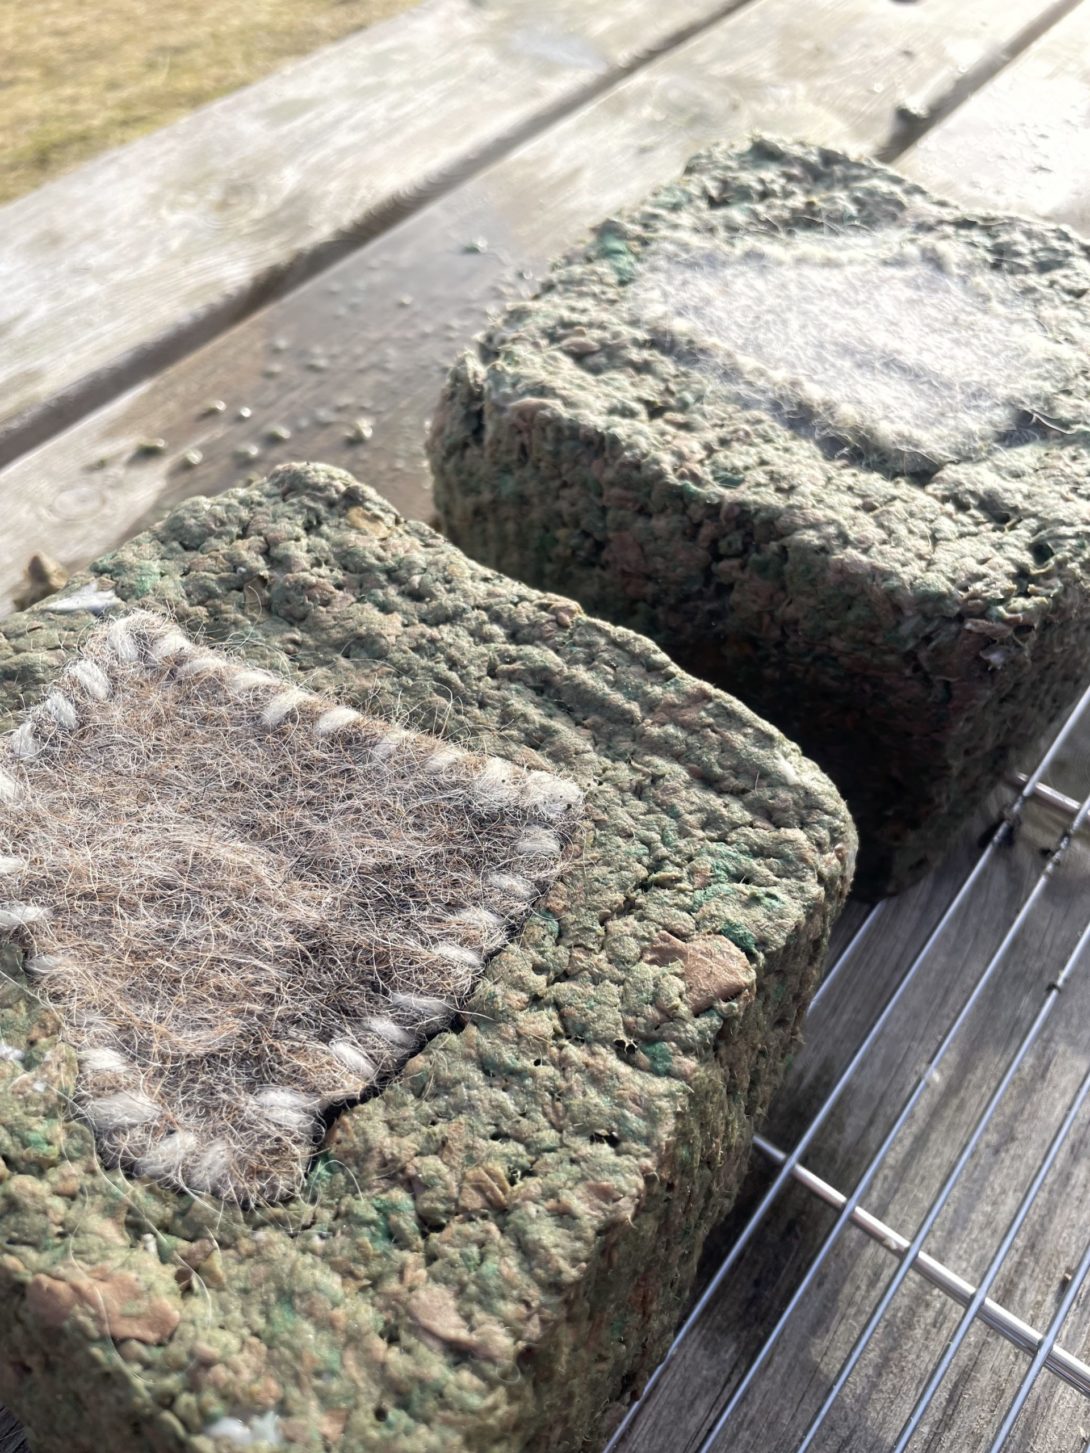 Green paper pulp molds with wool forms inside them on a picnic table